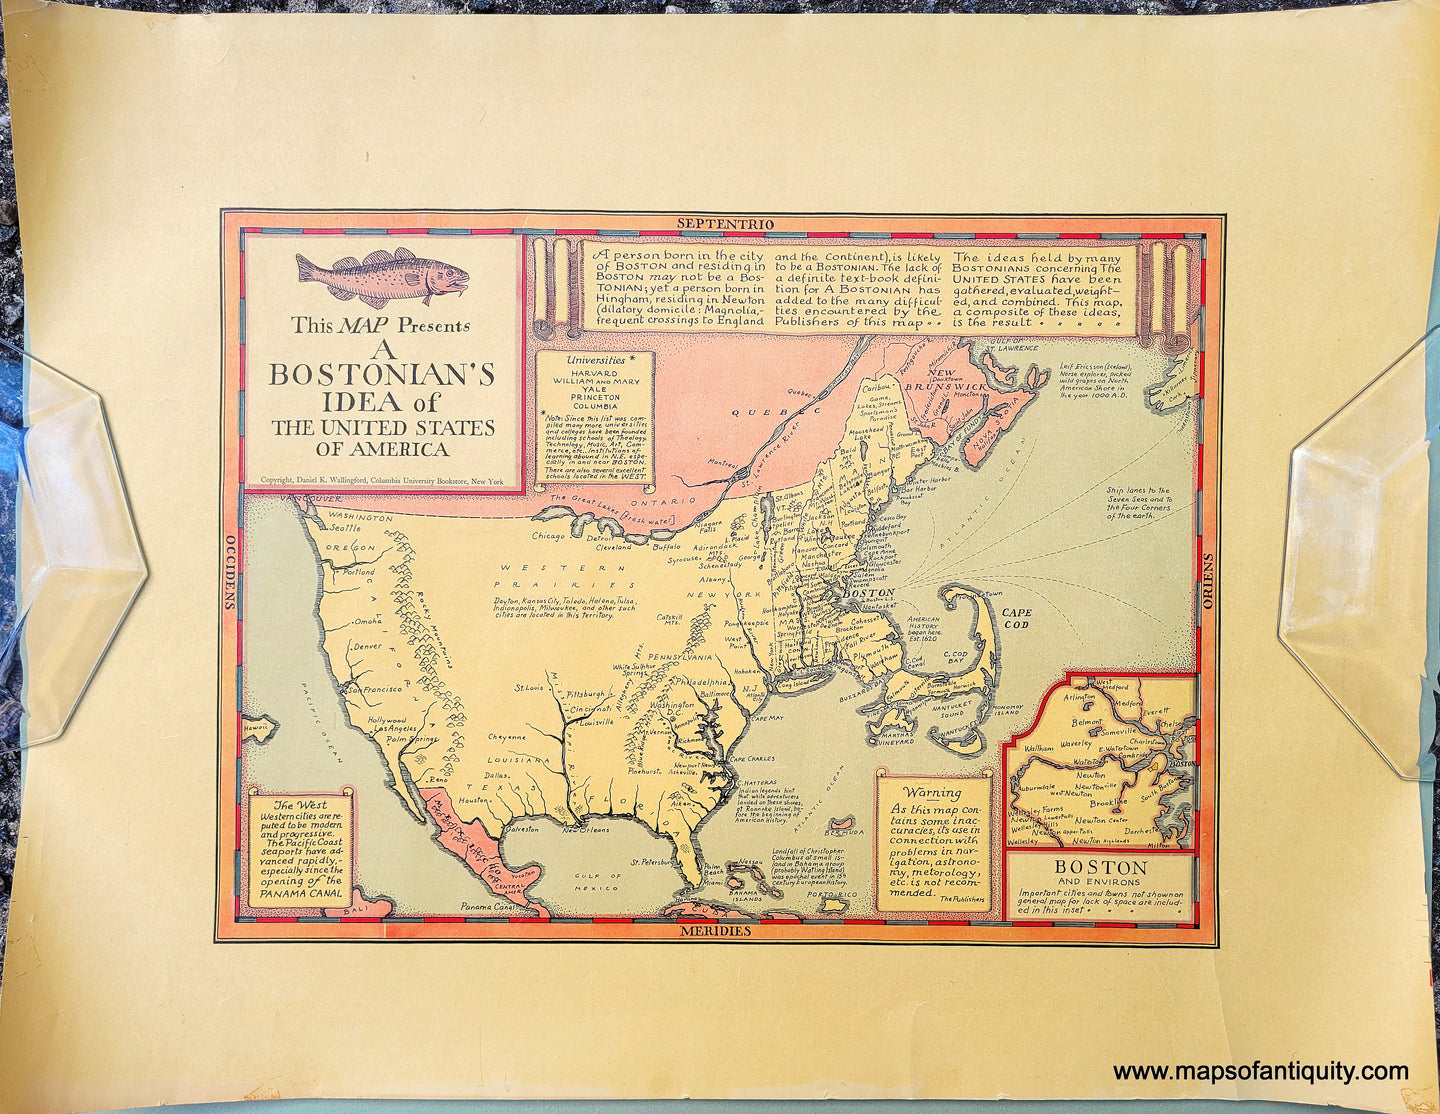 Antique-Map-Pictorial-This-Map-Presents-A-Bostonian's-Idea-of-the-United-States-of-America-c.-1937-Daniel-WallingfordMaps-of-Antiquity